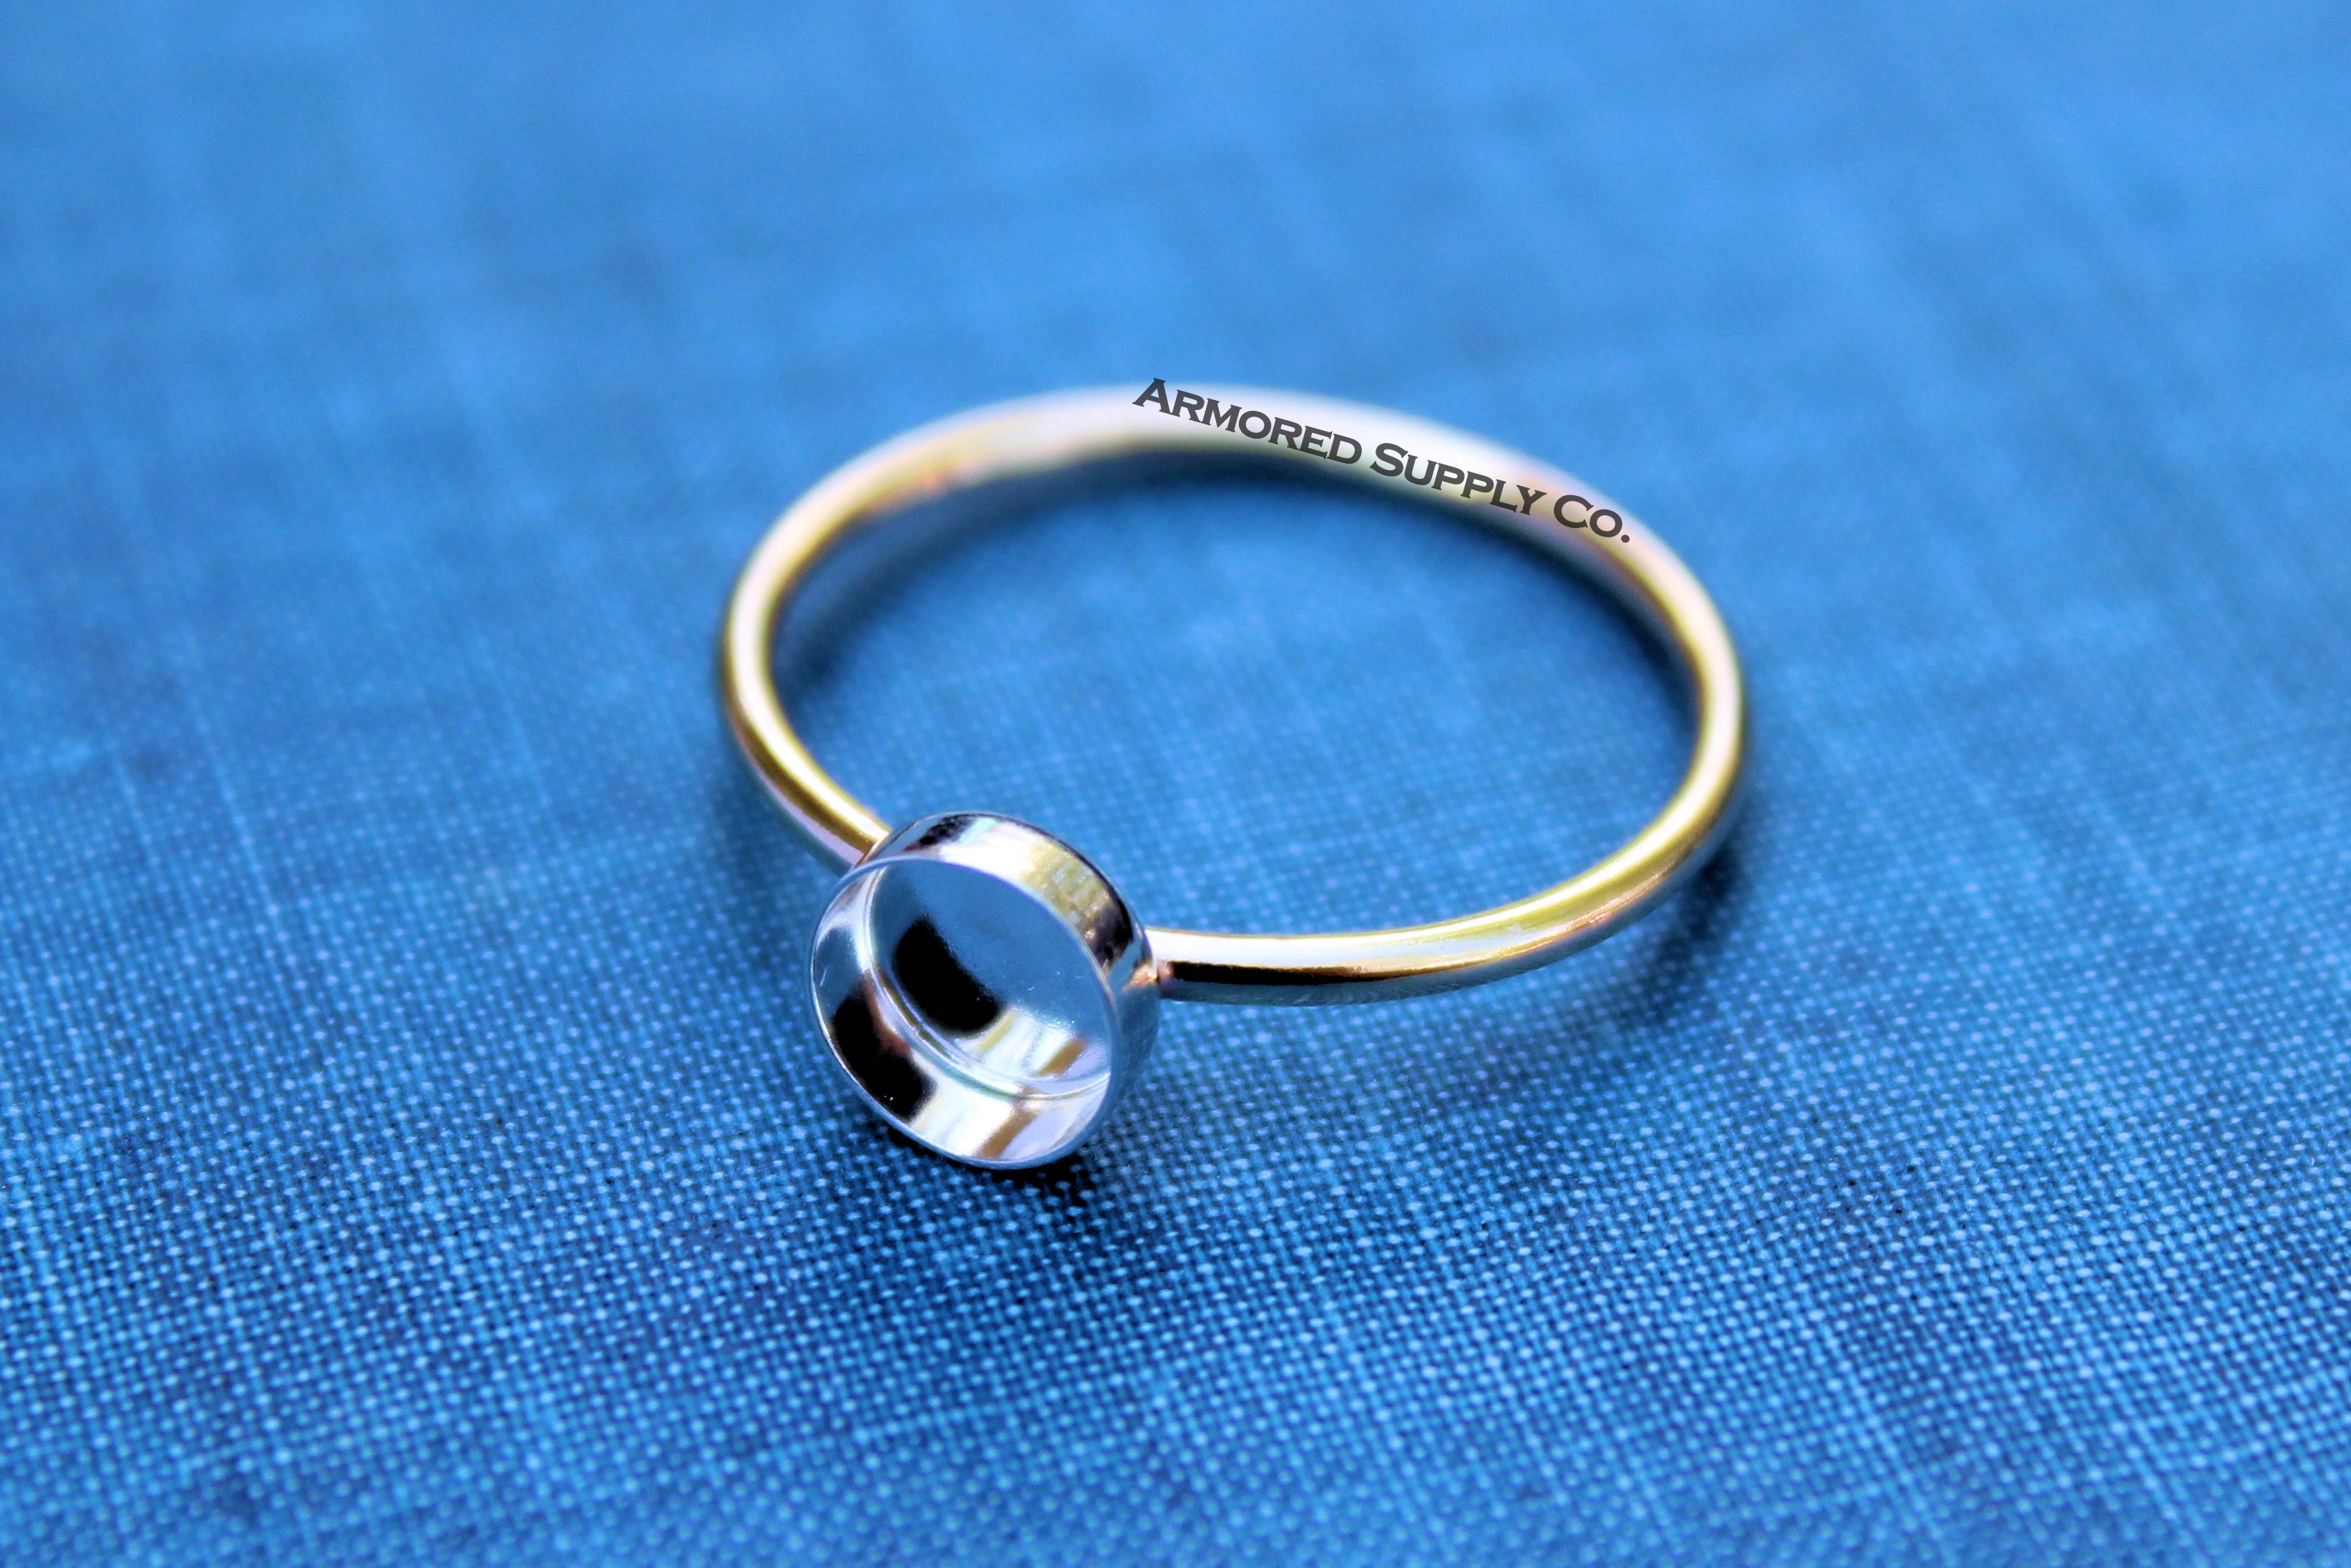 MIXED METALS Gold & Silver 3mm Plain Round Bezel Ring Blank